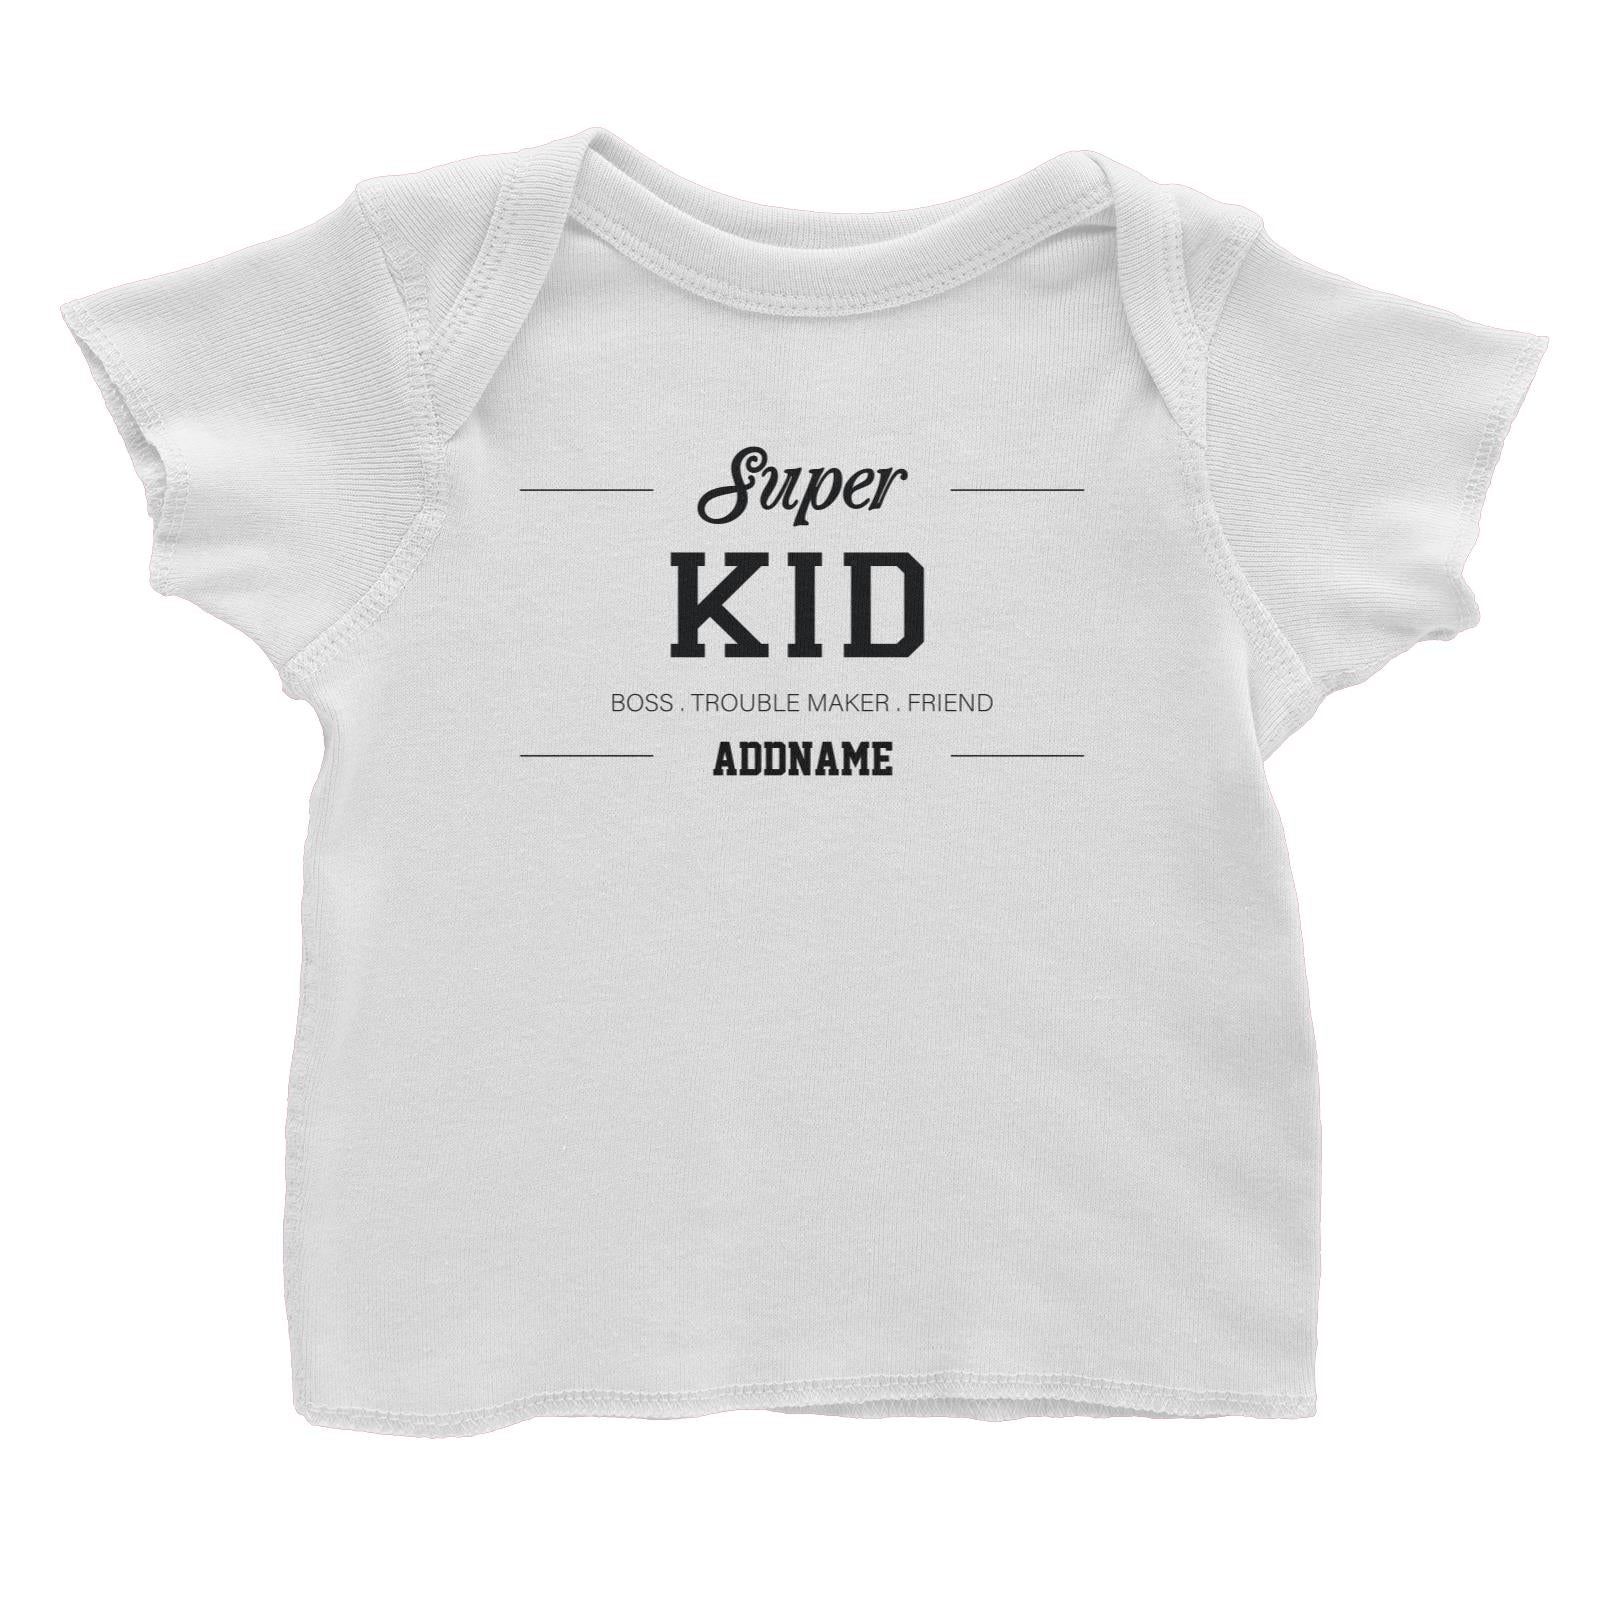 Super Definition Family Super Kid Addname Baby T-Shirt